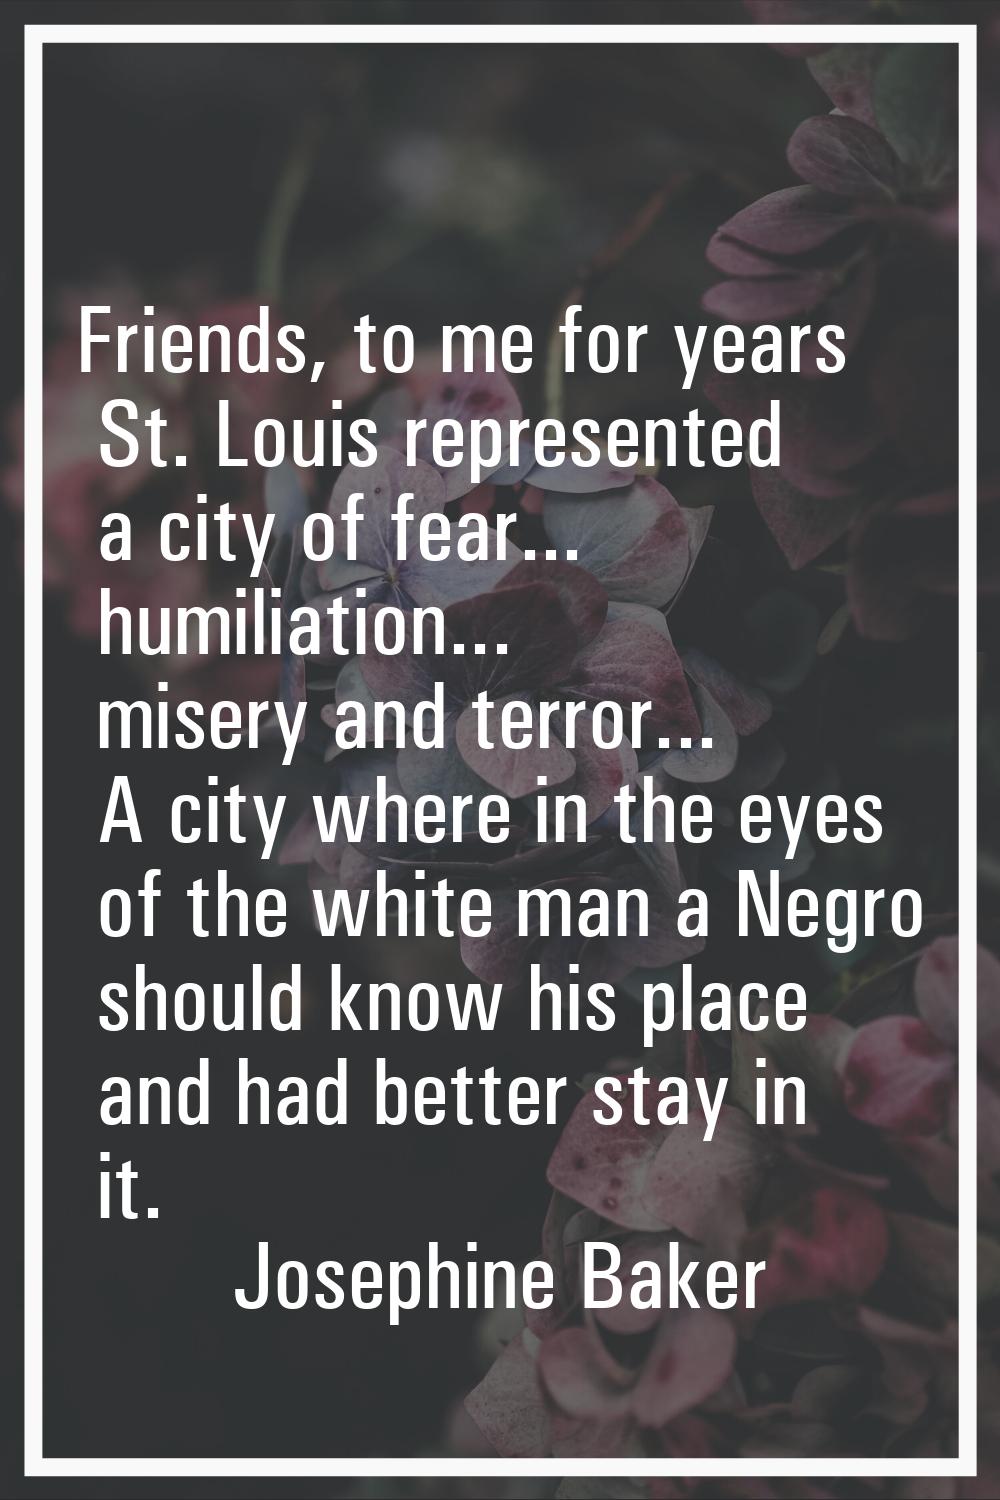 Friends, to me for years St. Louis represented a city of fear... humiliation... misery and terror..